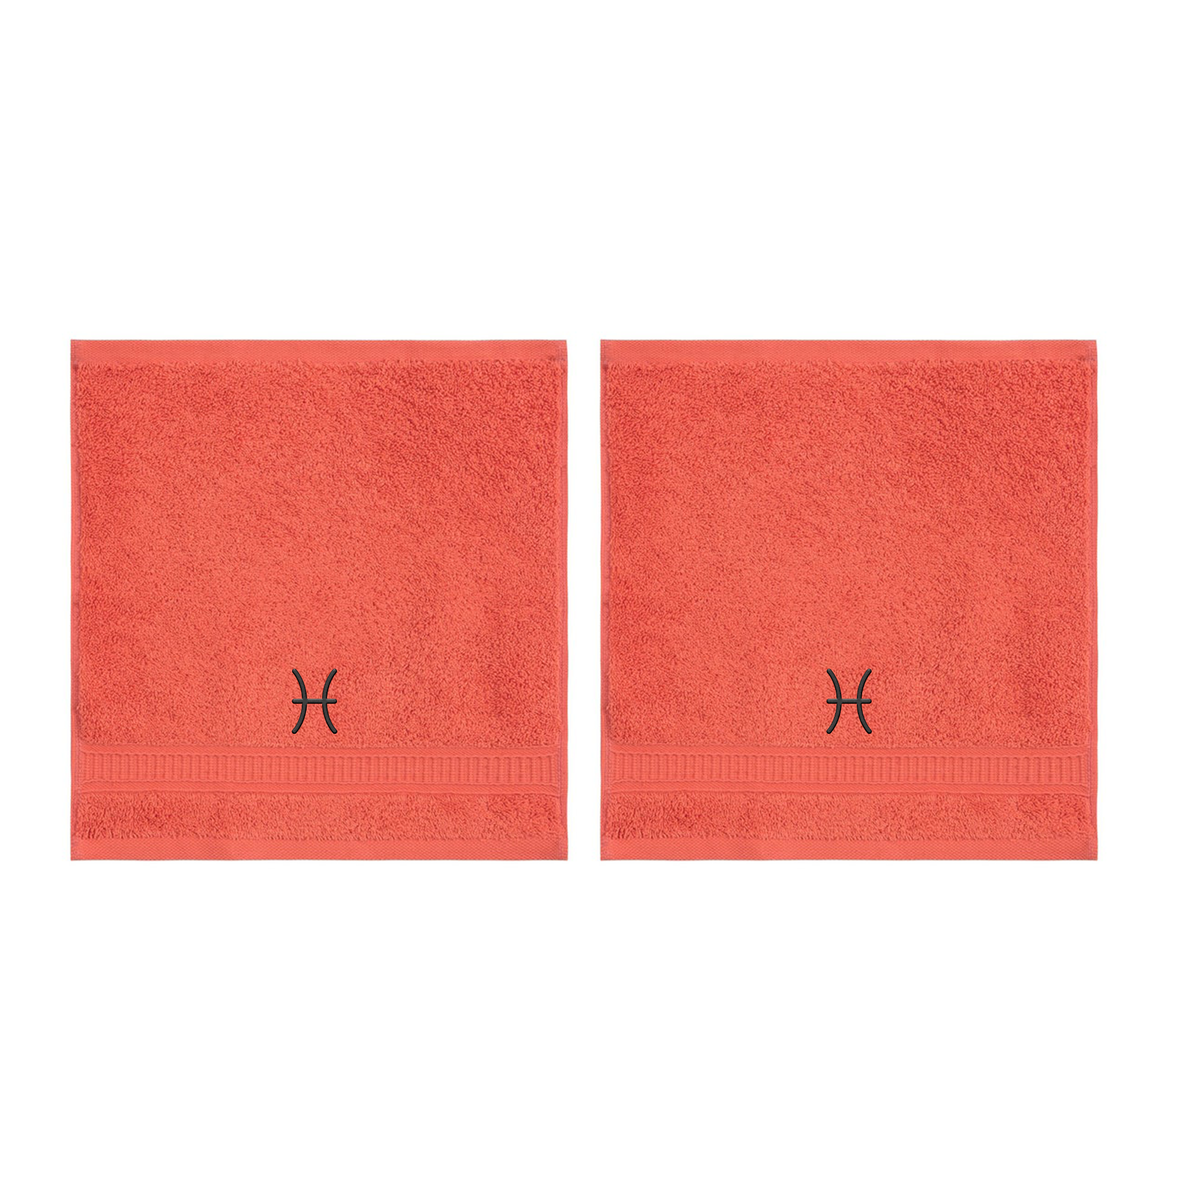 Customized Zodiac Towels - Washcloths and Hand Towels - Set of 2